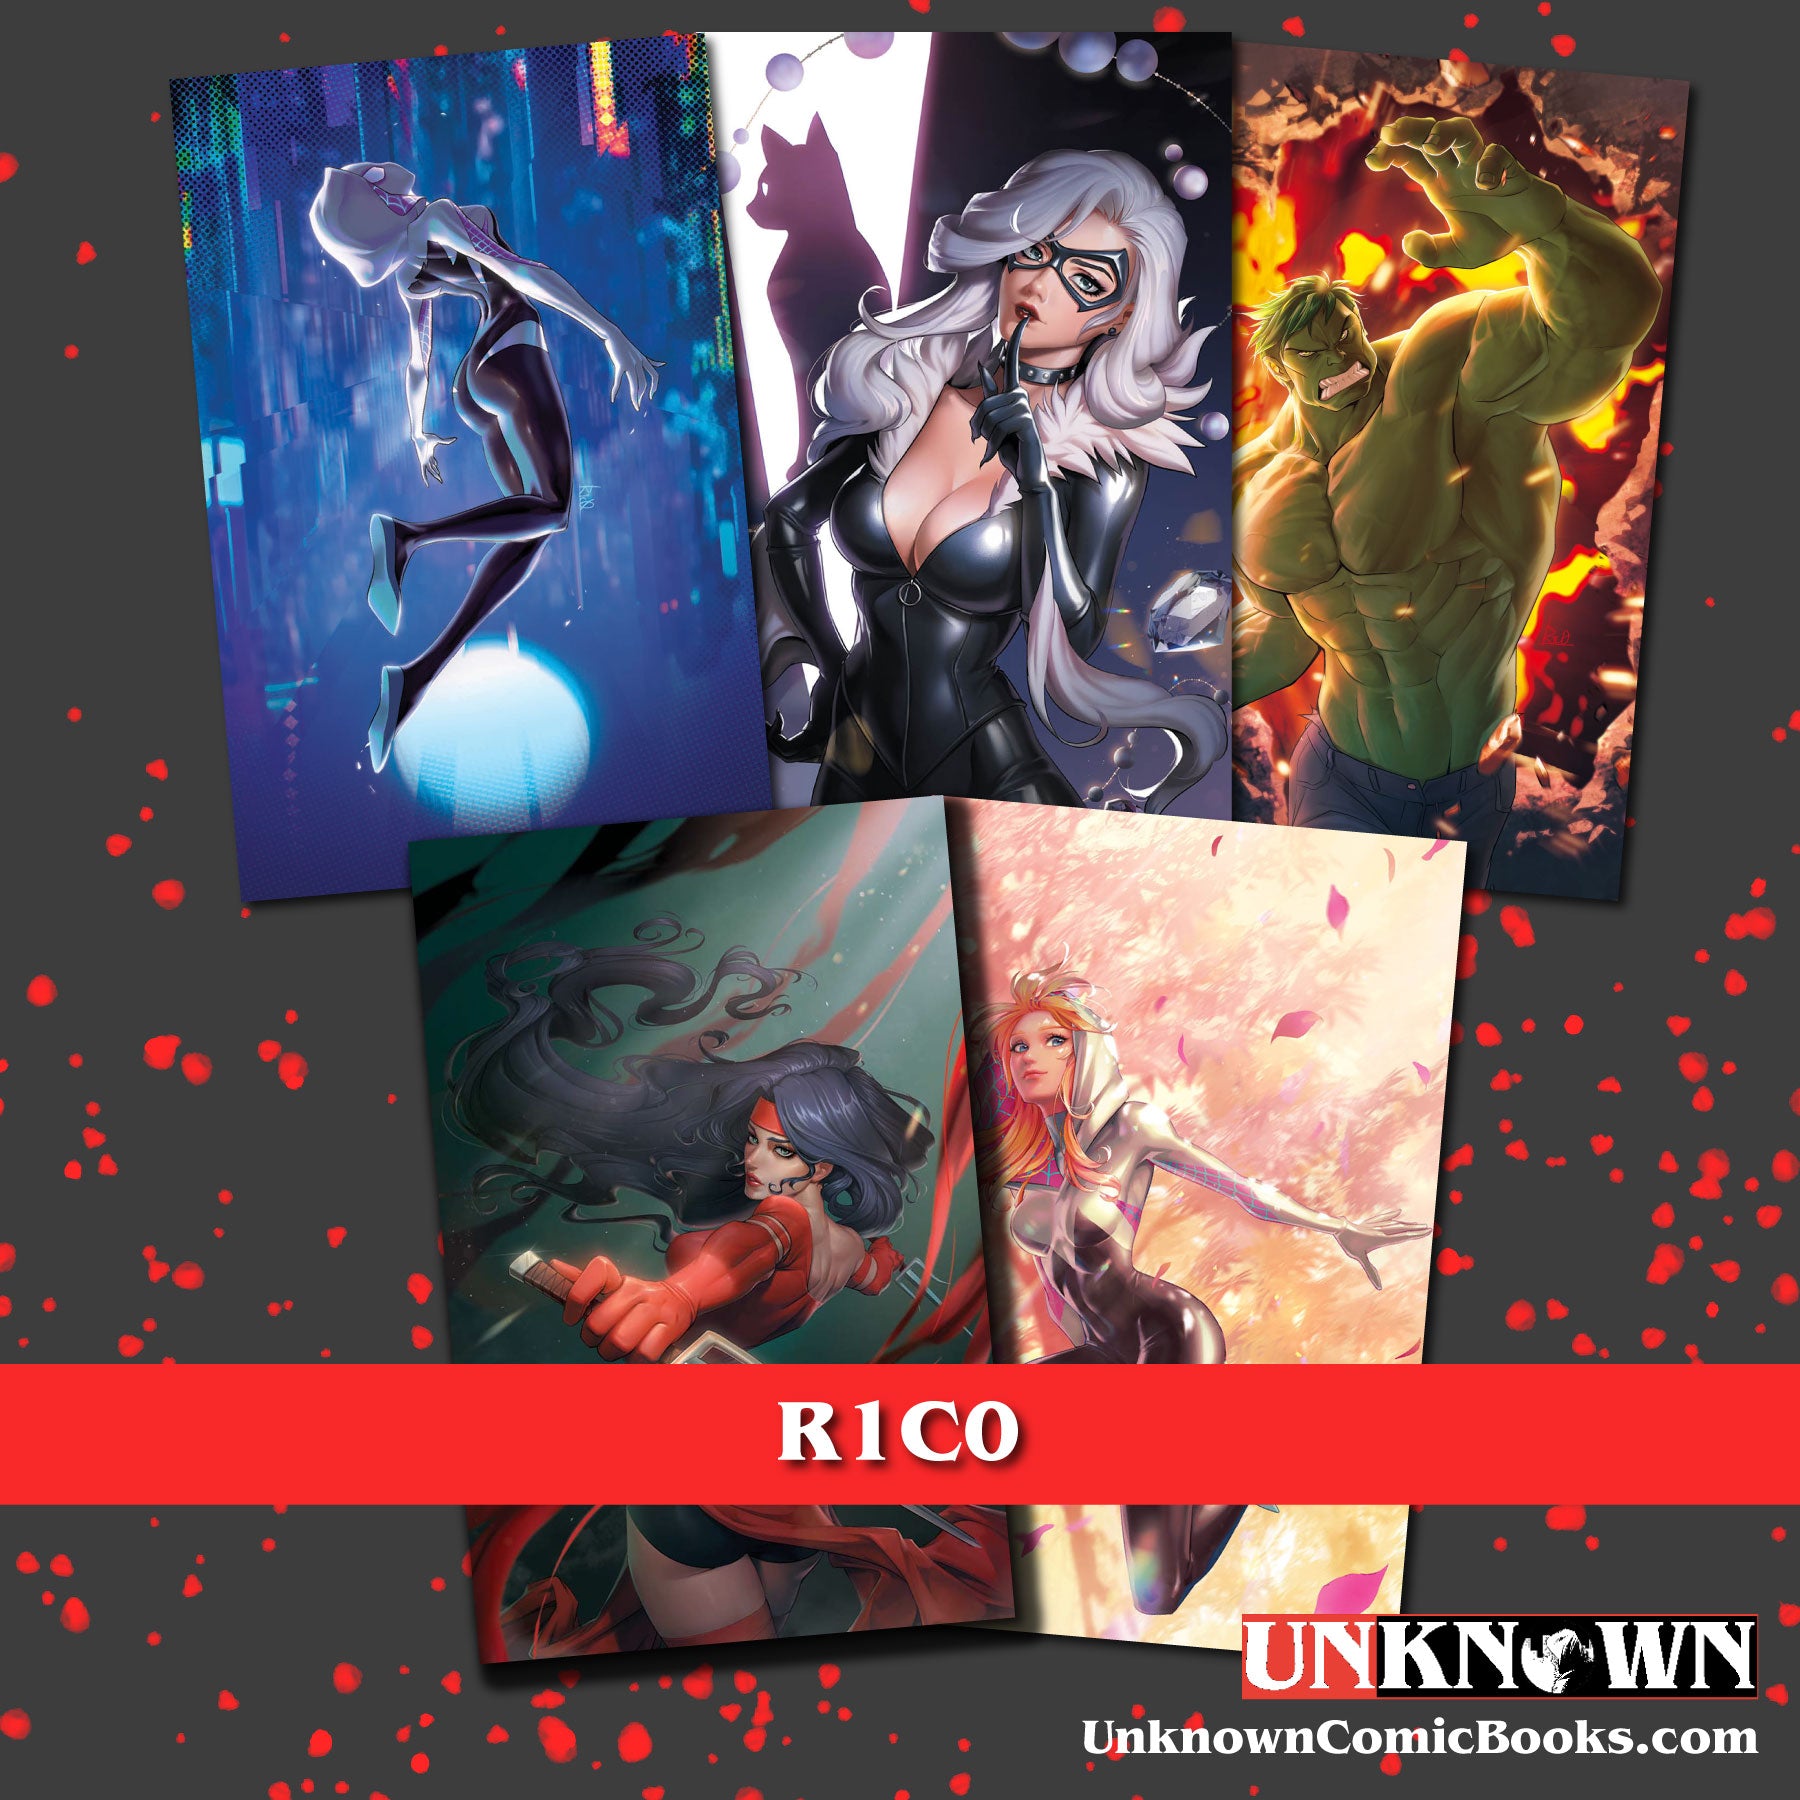 [5 PACK] UNKNOWN COMICS MYSTERY THEMED 👉🎨R1C0 ARTIST EXCLUSIVE BOX 👉VIRGIN (12/21/2022)